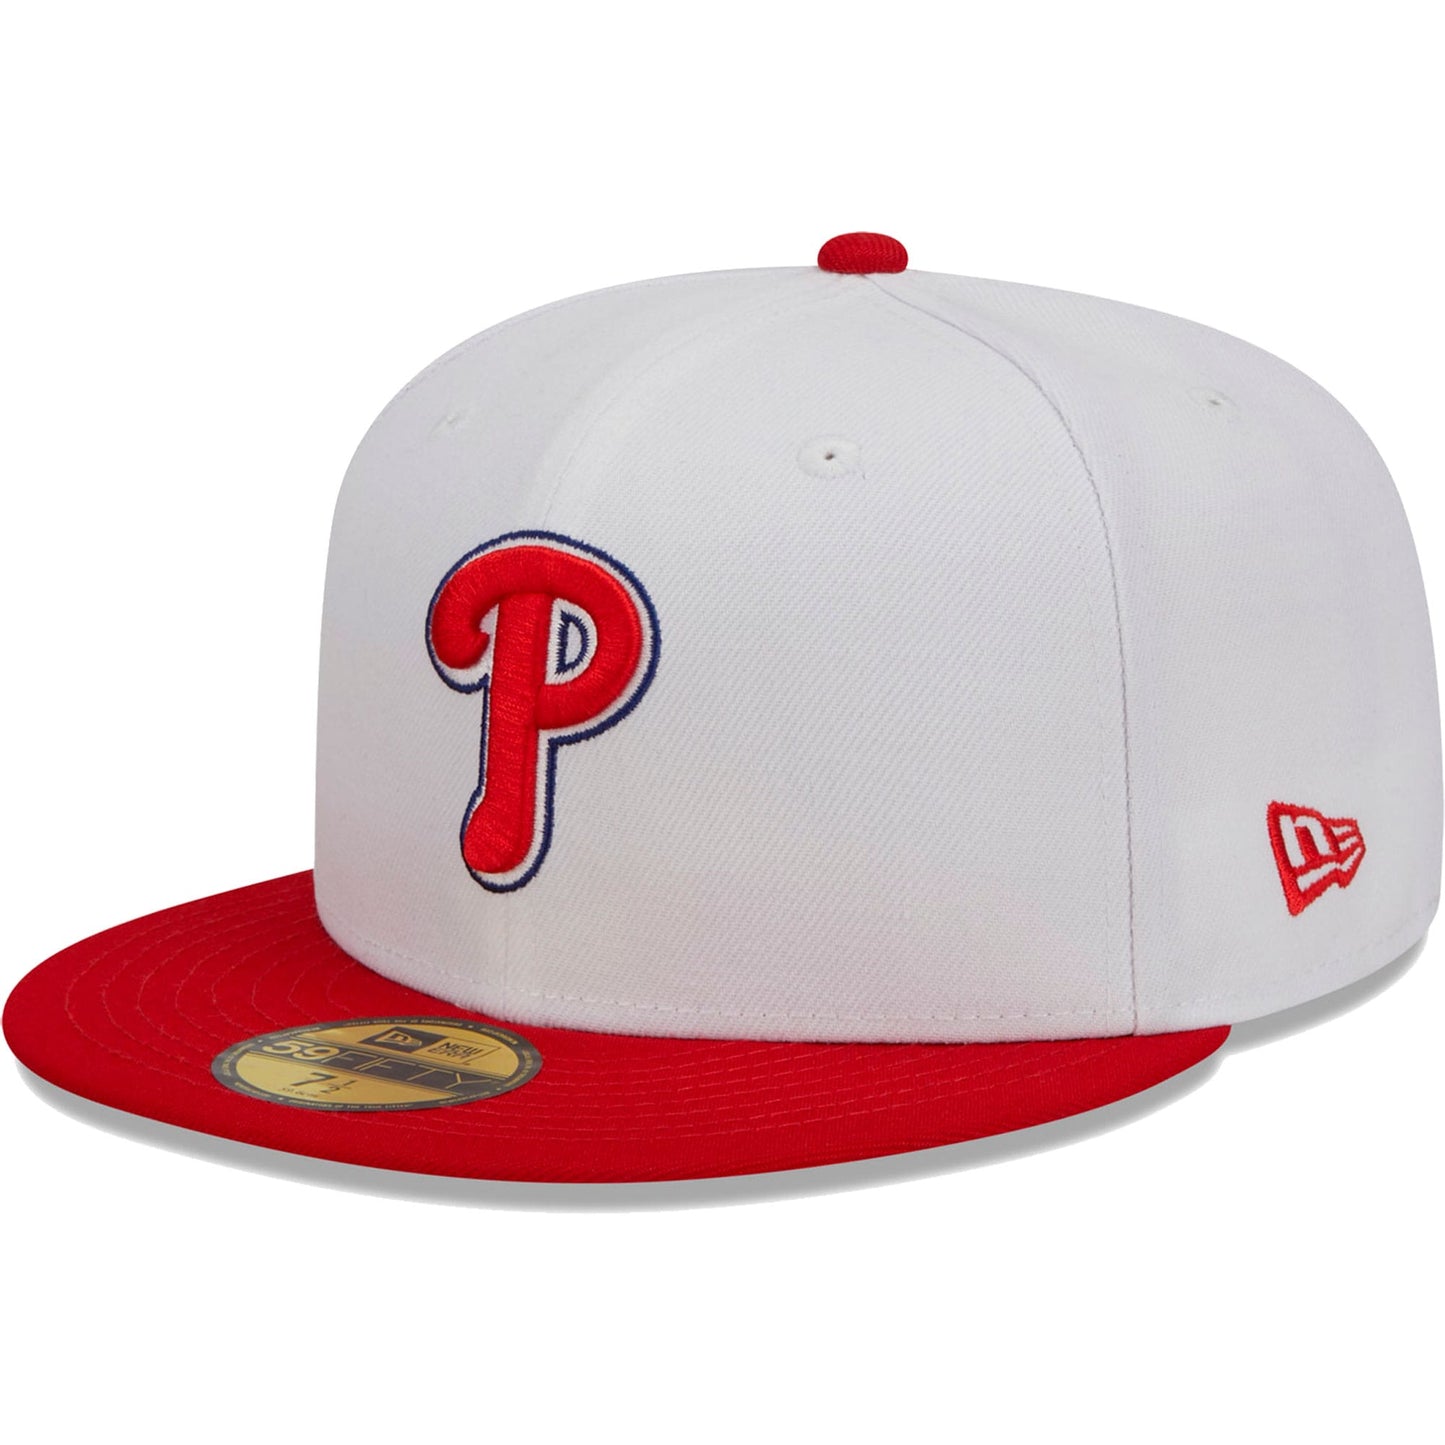 Philadelphia Phillies New Era Optic 59FIFTY Fitted Hat - White/Red